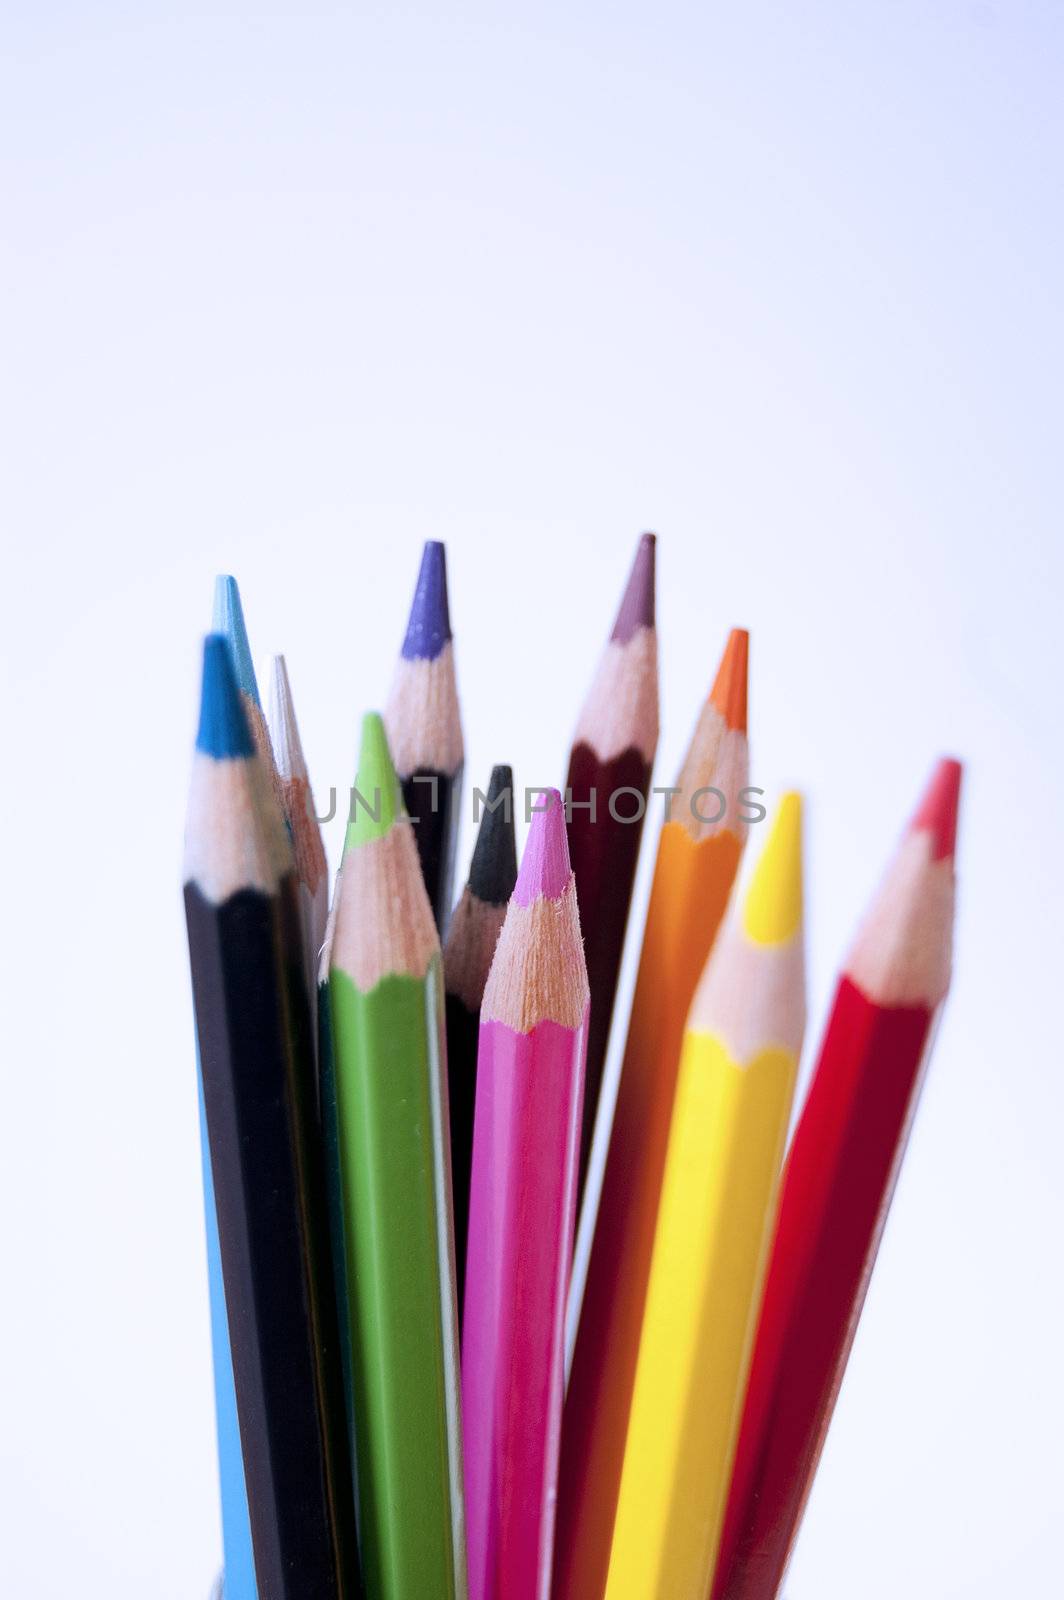 Colored pencils by cla78